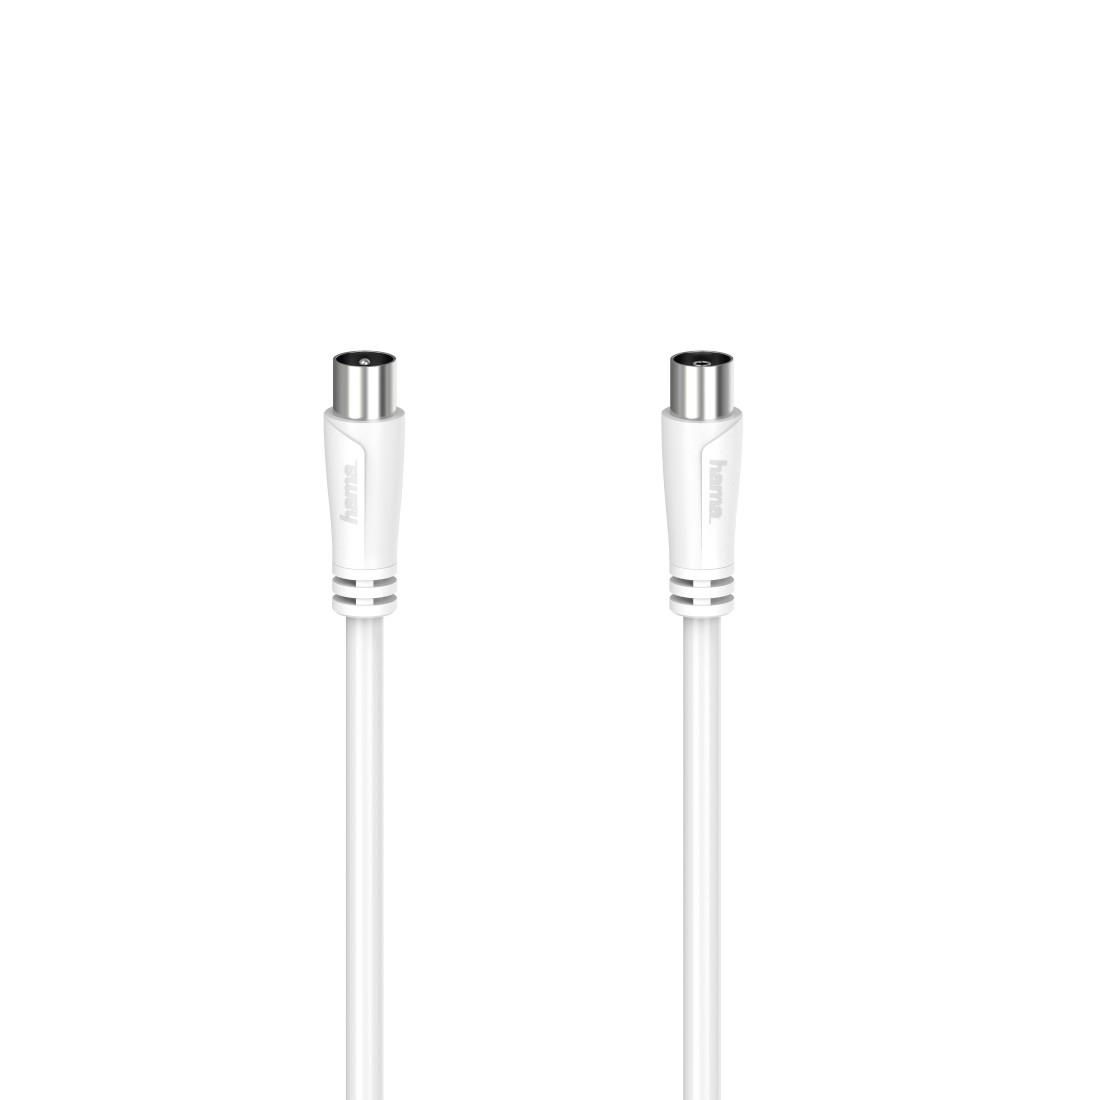 Hama 205044 W128824604 4 Coaxial Cable 0.75 M White 